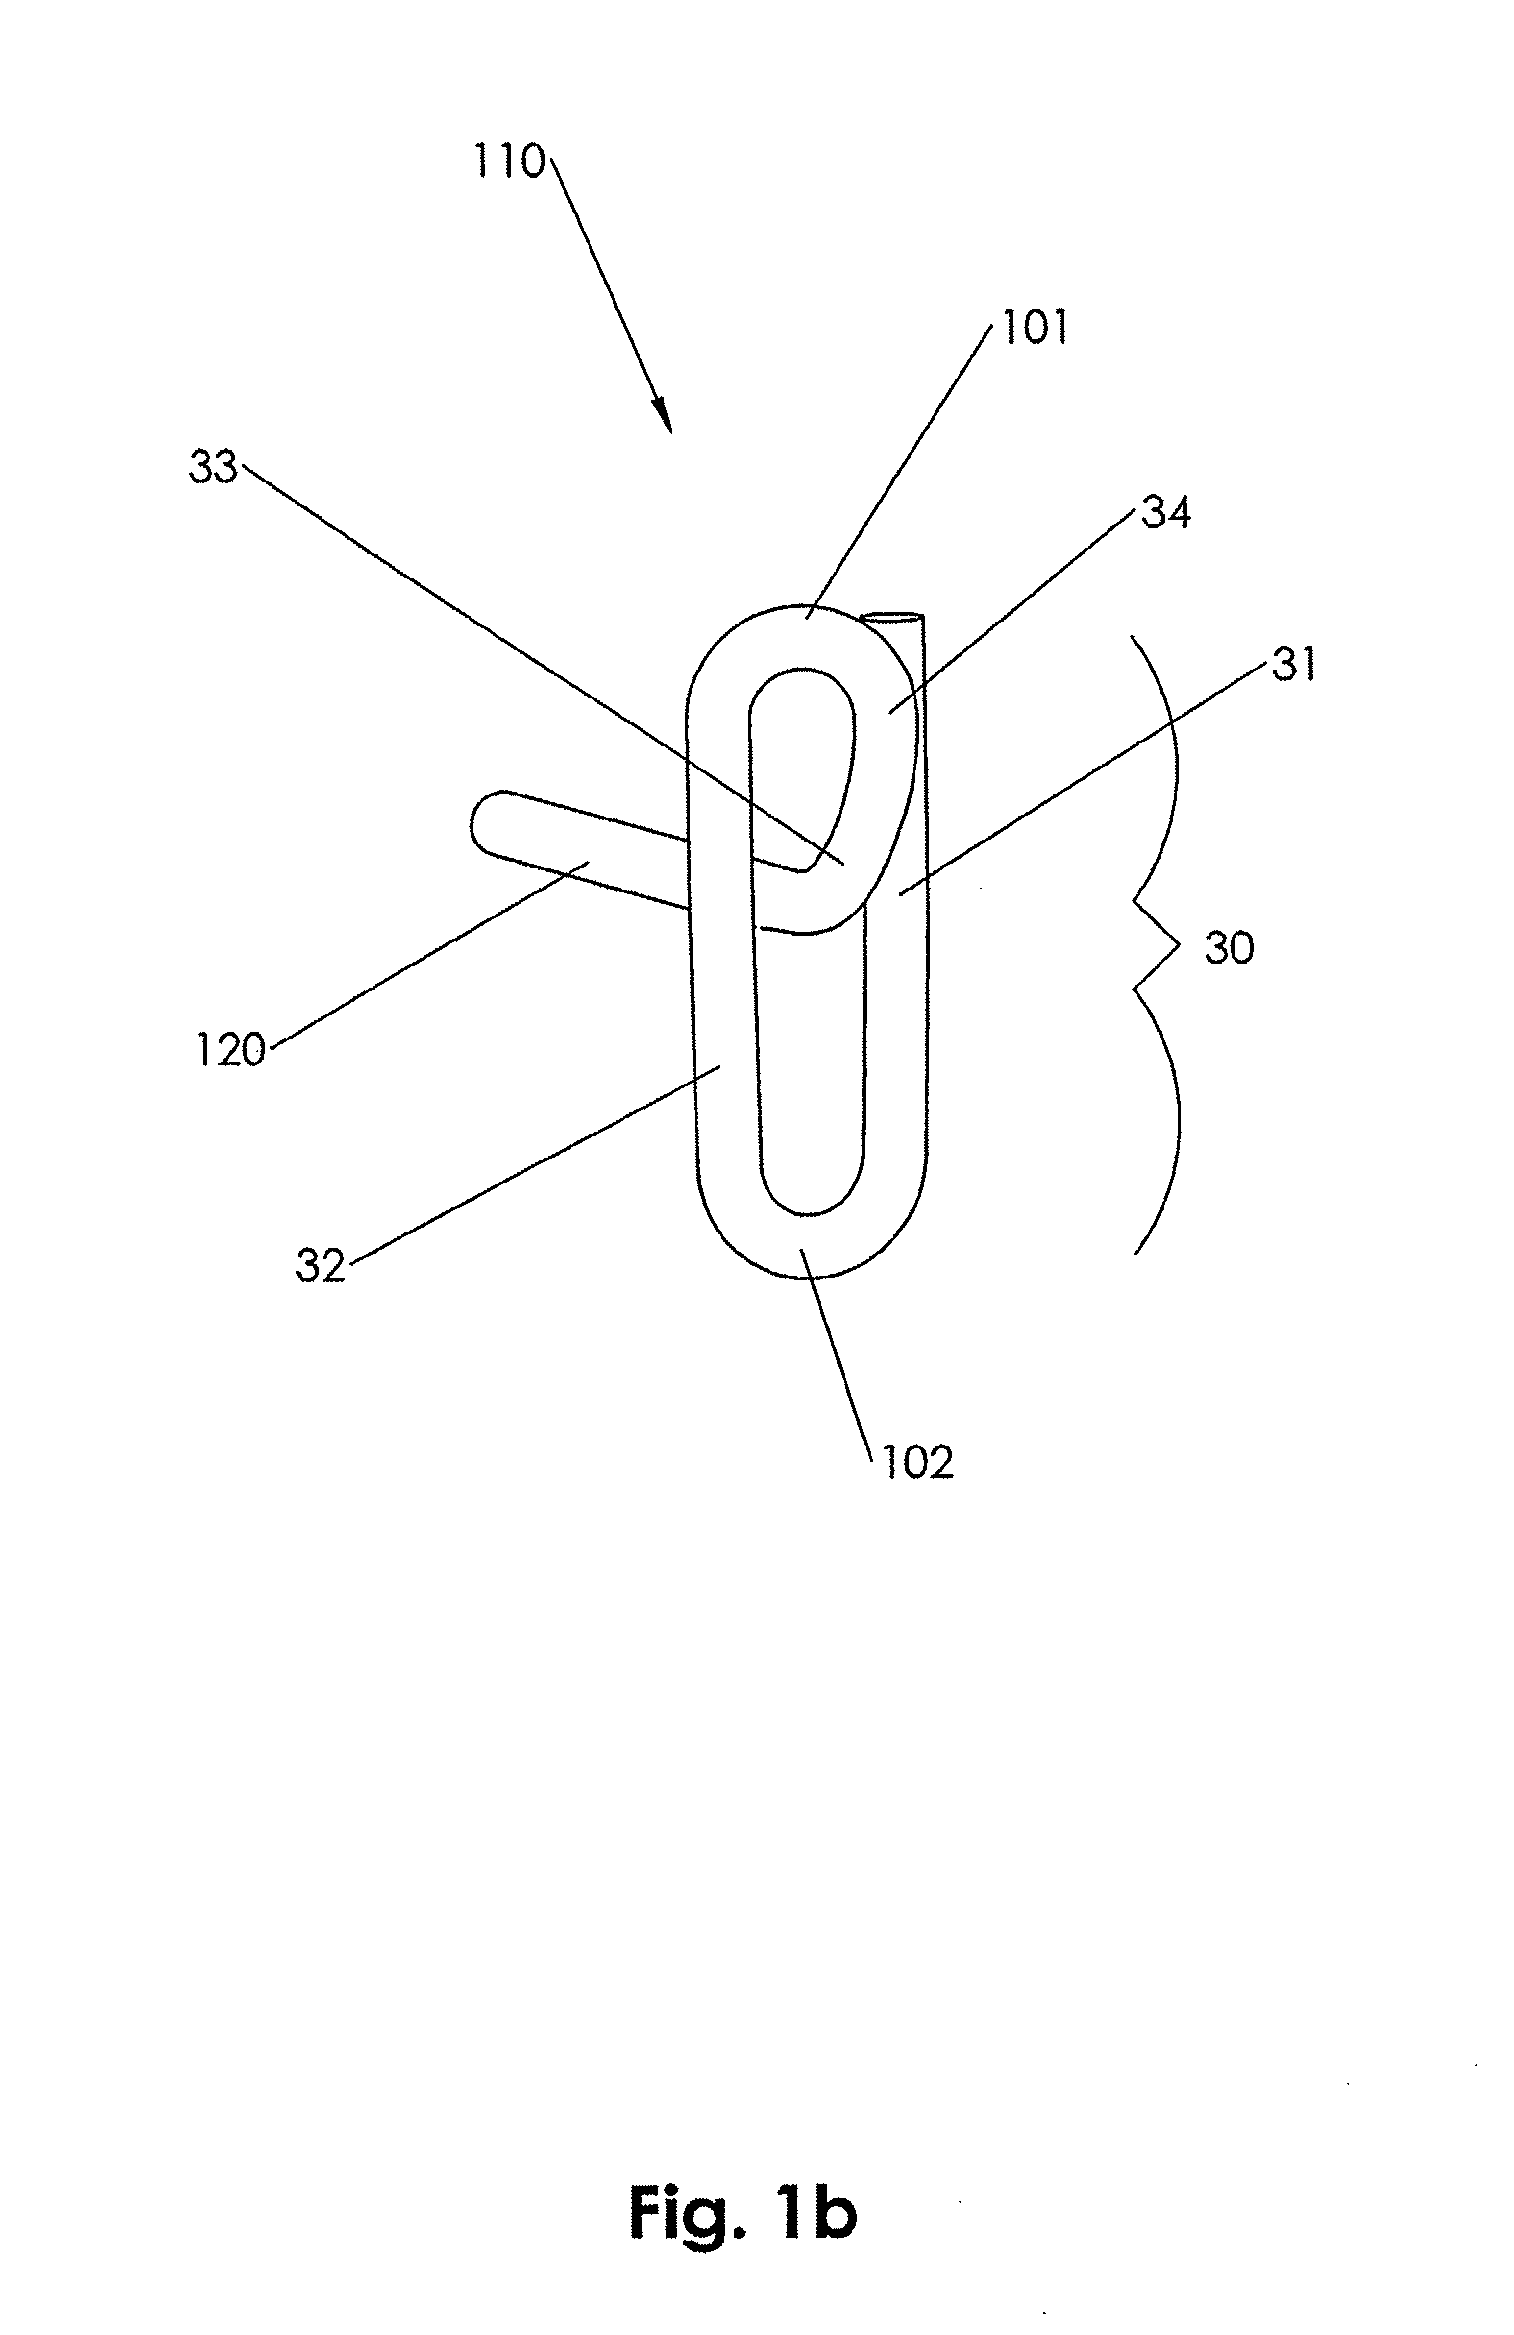 Closure Device, Deployment Apparatus, and Method of Deploying a Closure Device